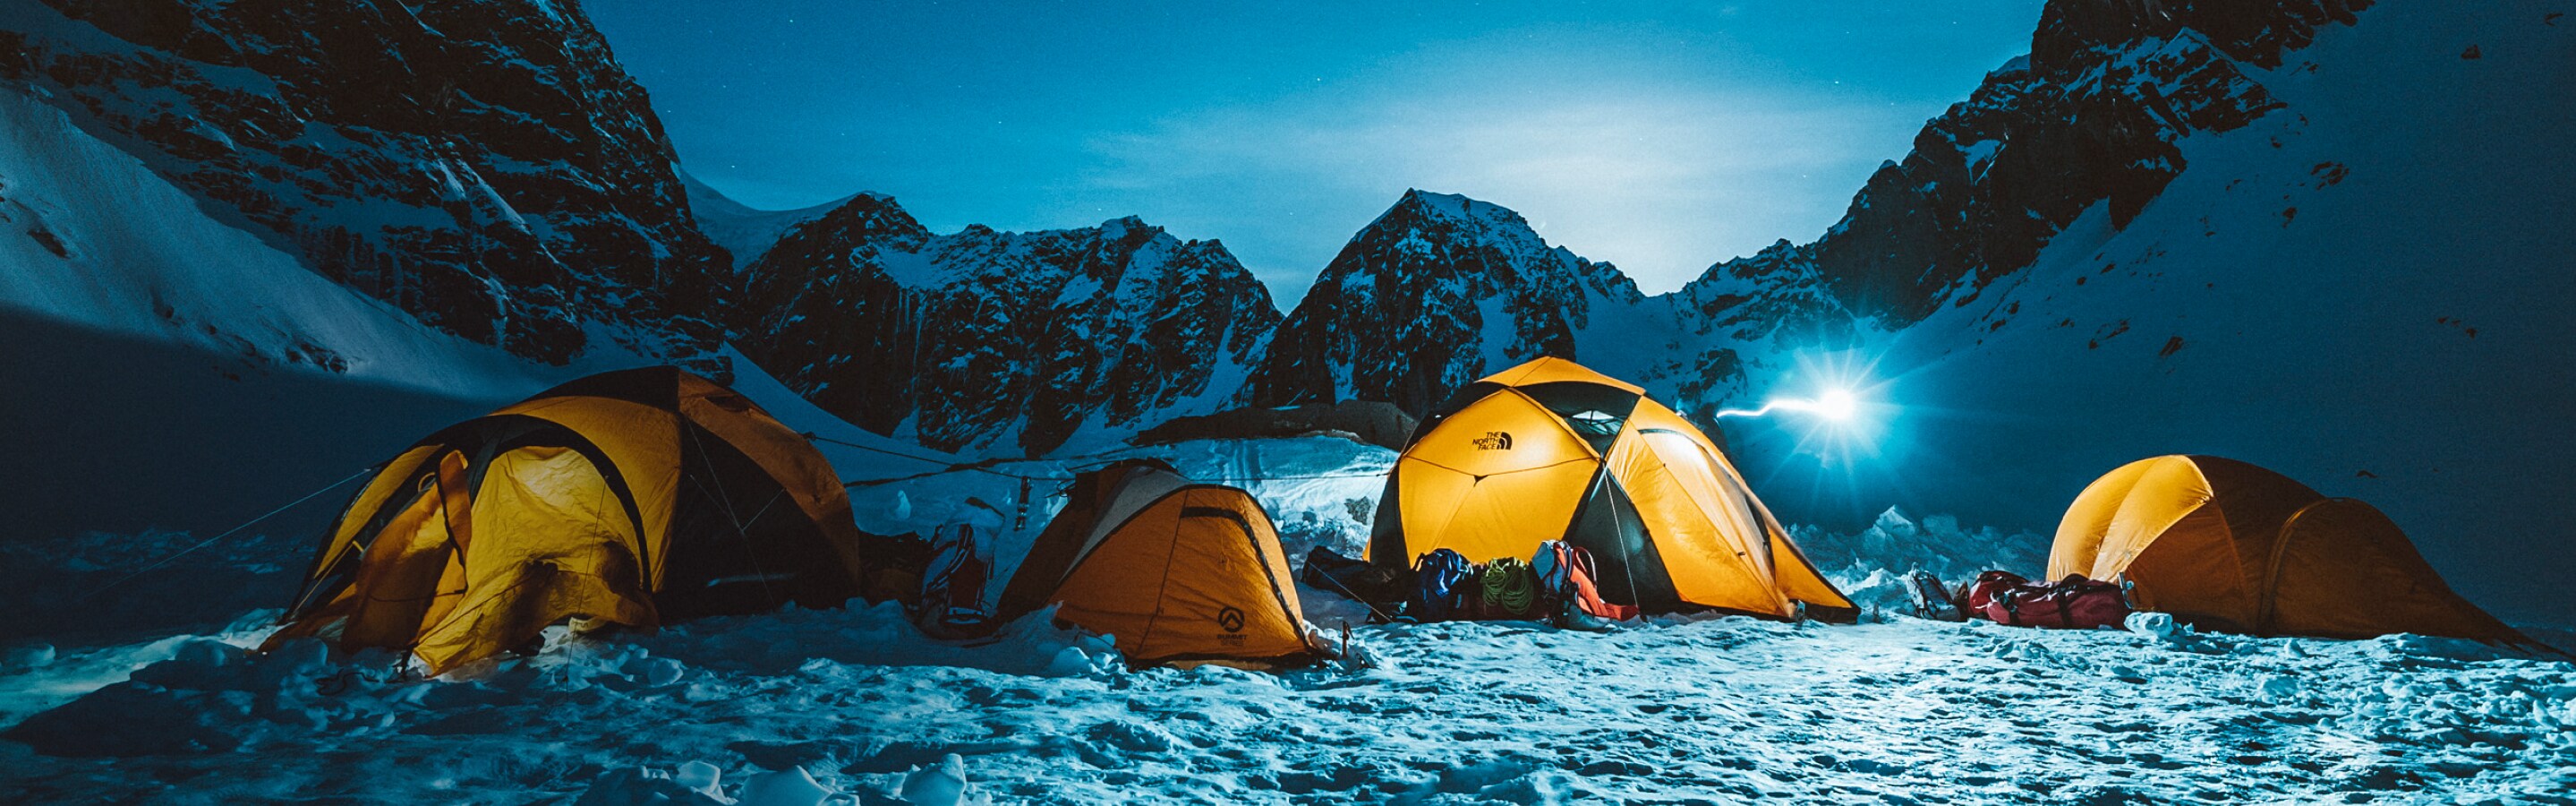 Tents from The North Face against a snowy, mountainous night sky.